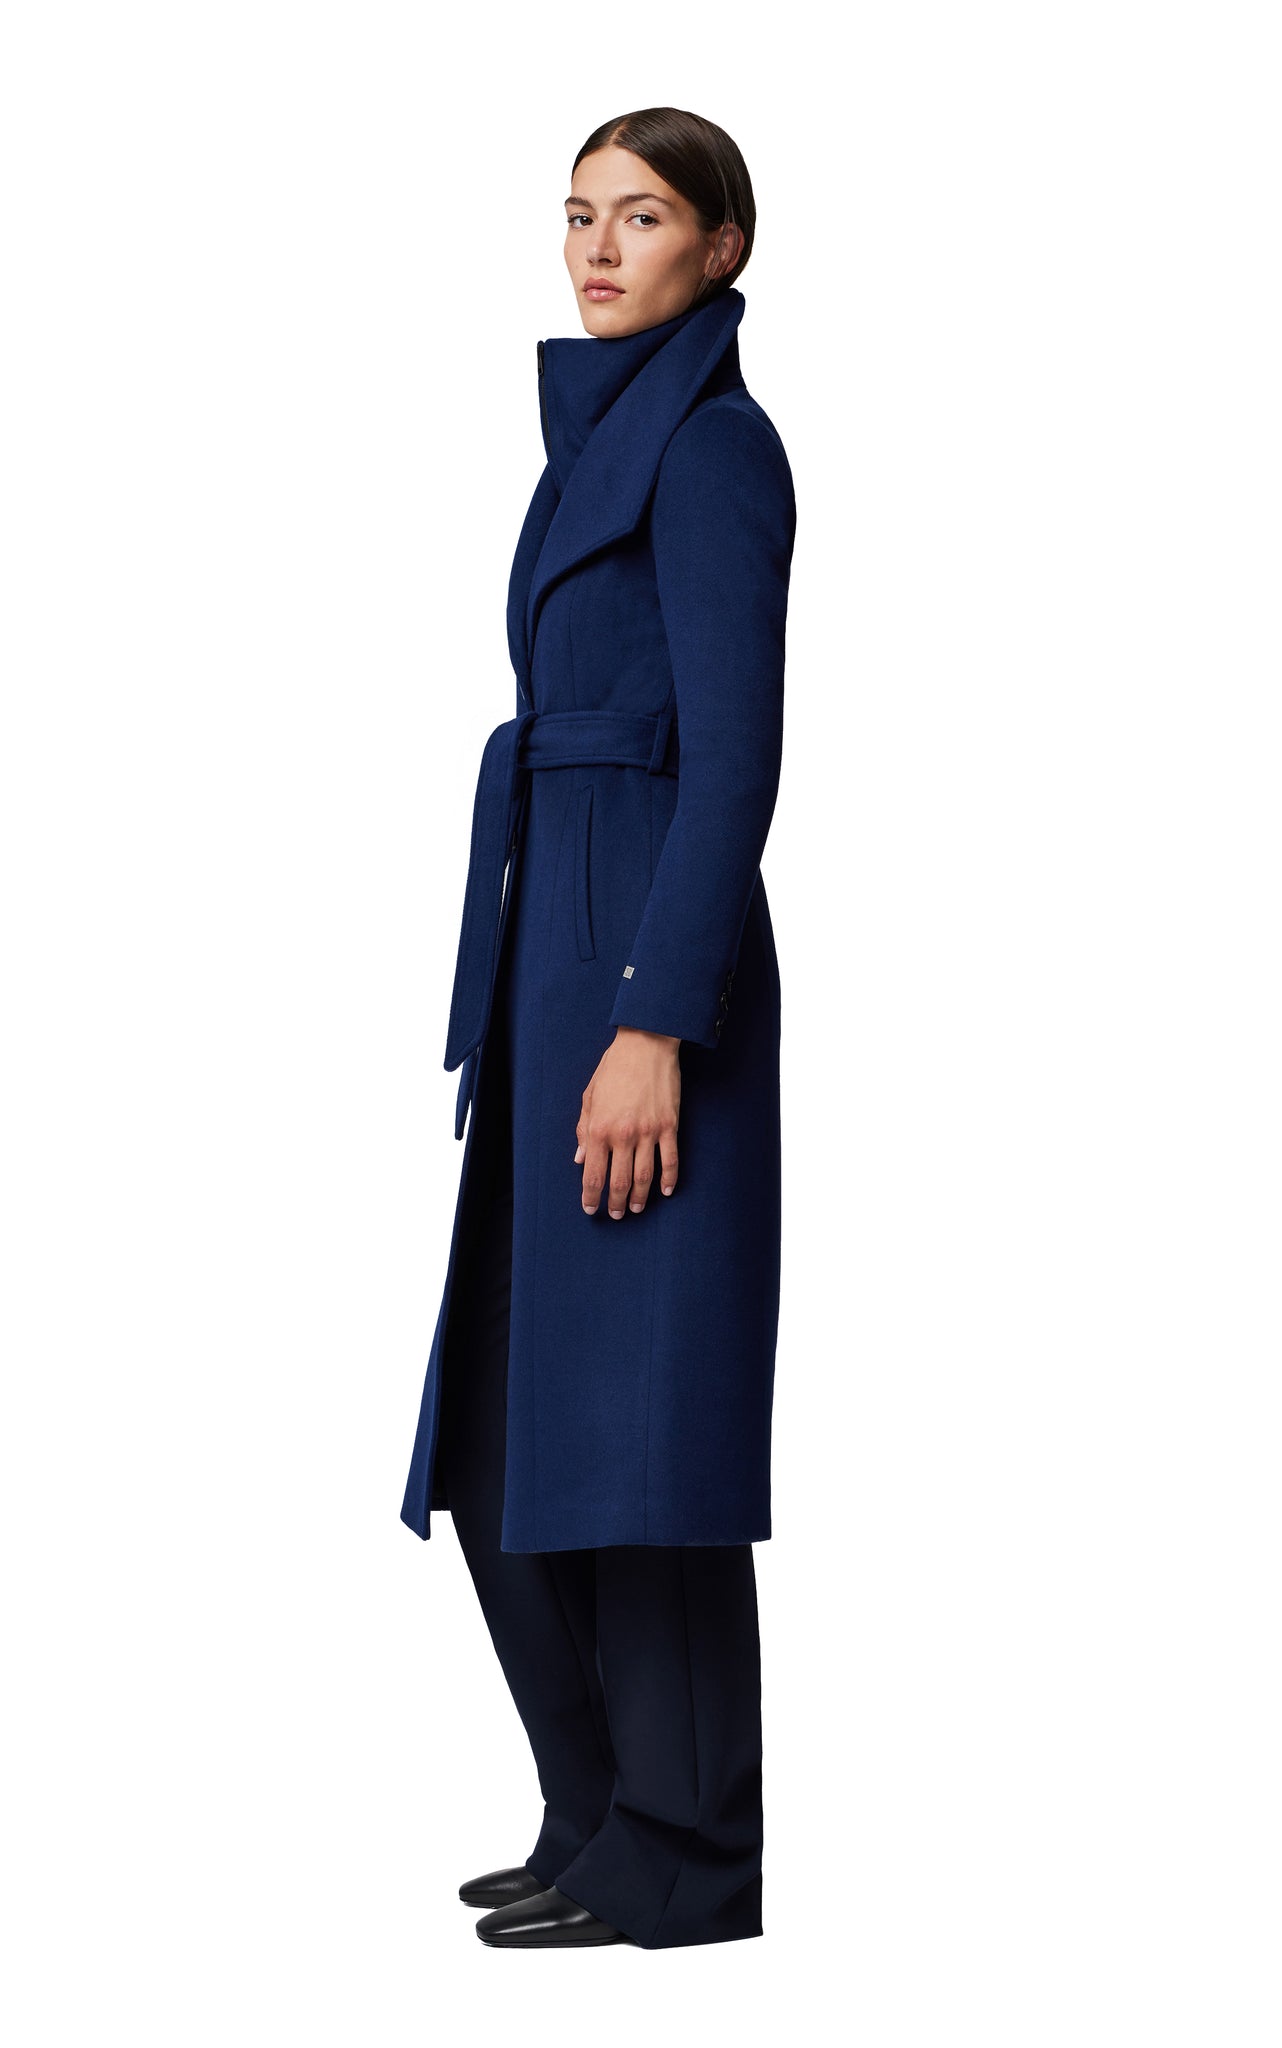 Photo of model wearing Ilana Coat in colour Lapis from Soia & Kyo available at UniKoncept in Waterloo side view